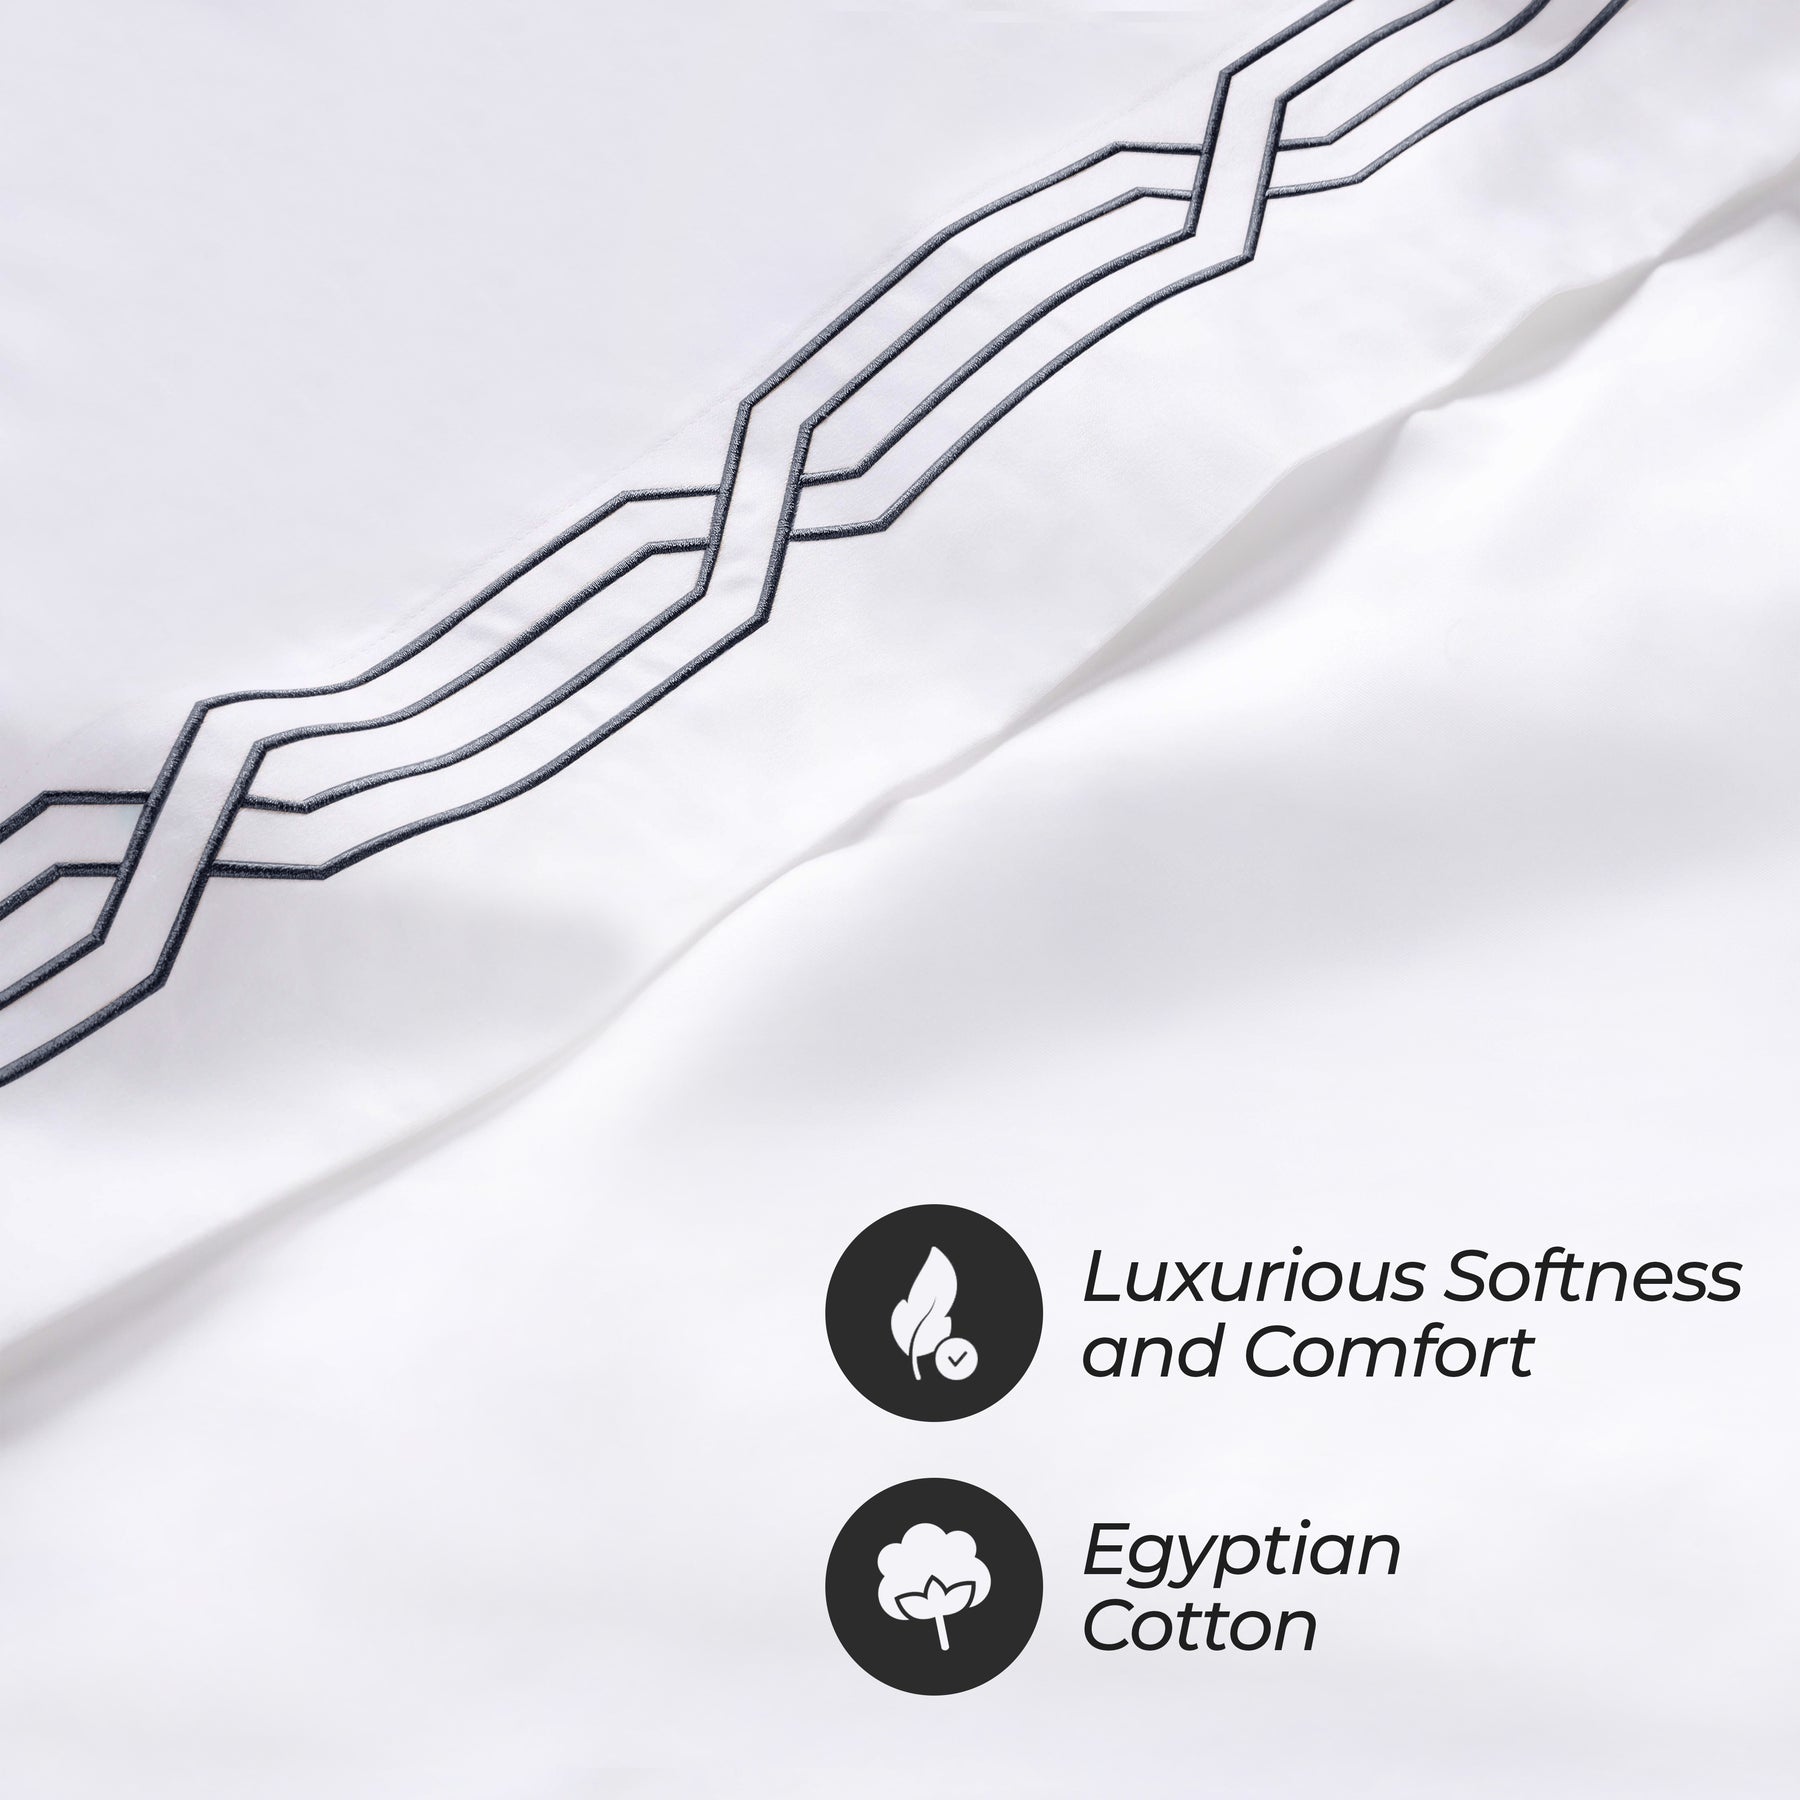 Superior Egyptian Cotton 1200 Thread Count Embroidered Geometric Scroll Bed Sheet Set - White-Navy Blue